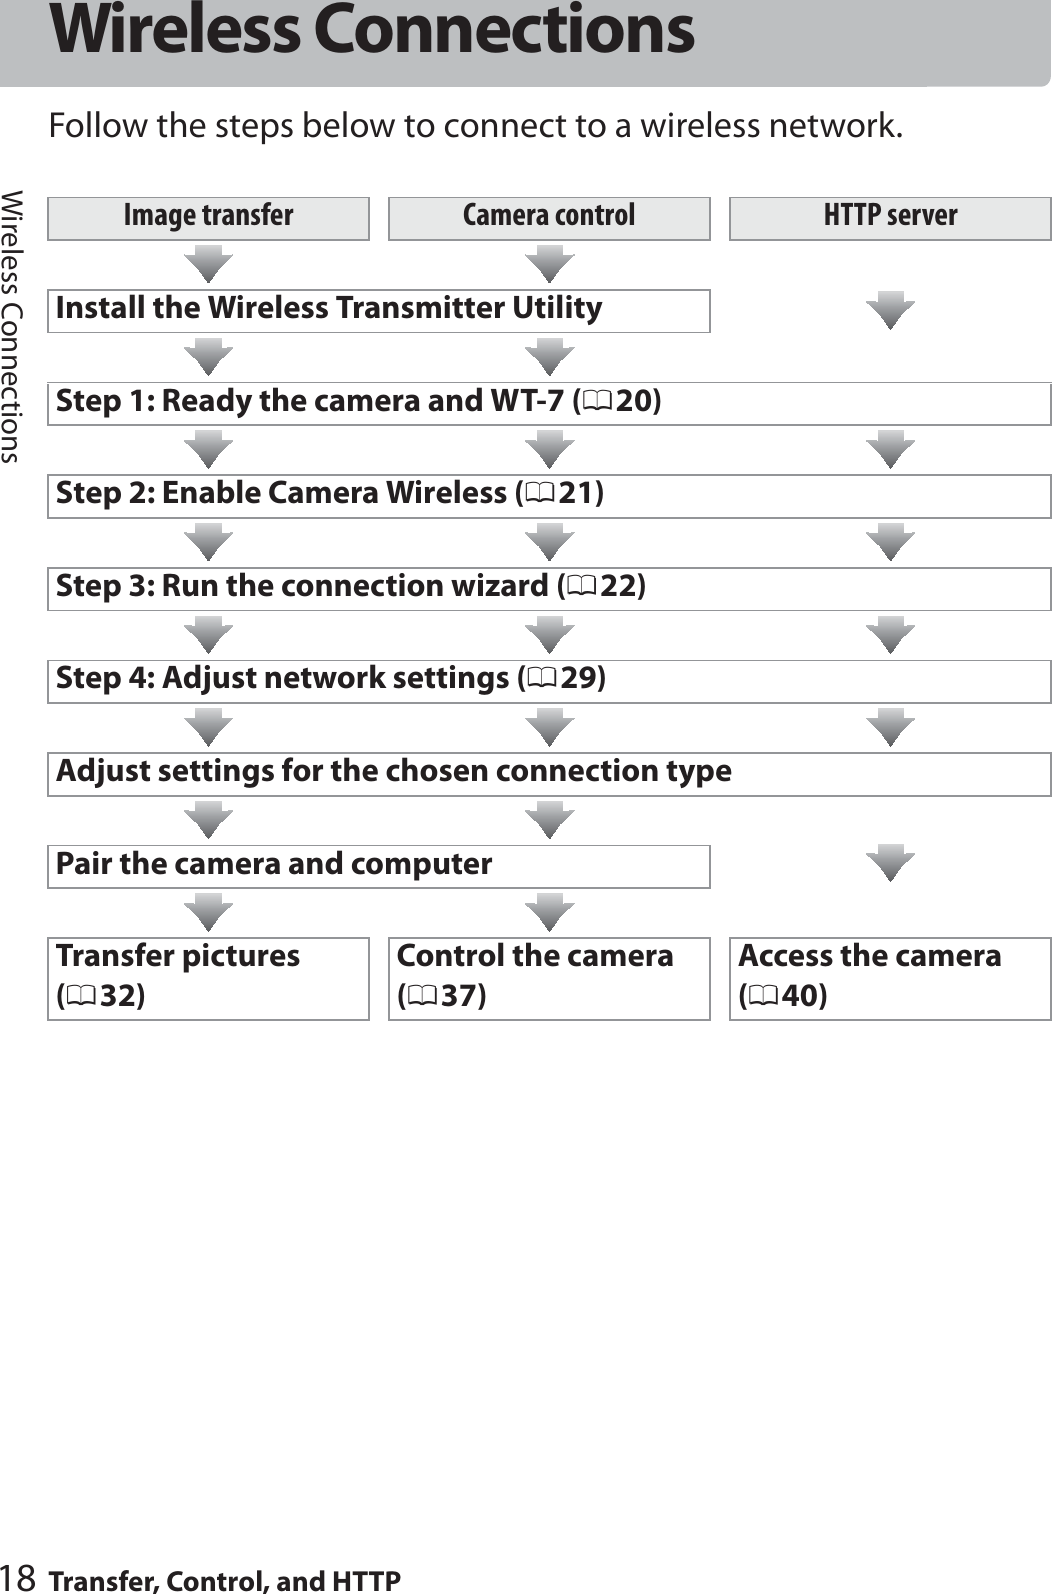 18 Transfer, Control, and HTTPWireless ConnectionsWireless ConnectionsFollow the steps below to connect to a wireless network.Image transfer Camera control HTTP serverInstall the Wireless Transmitter UtilityStep 1: Ready the camera and WT-7 (020)Step 2: Enable Camera Wireless (021)Step 3: Run the connection wizard (022)Step 4: Adjust network settings (029)Adjust settings for the chosen connection typePair the camera and computerTransfer pictures (032)Control the camera (037)Access the camera (040)